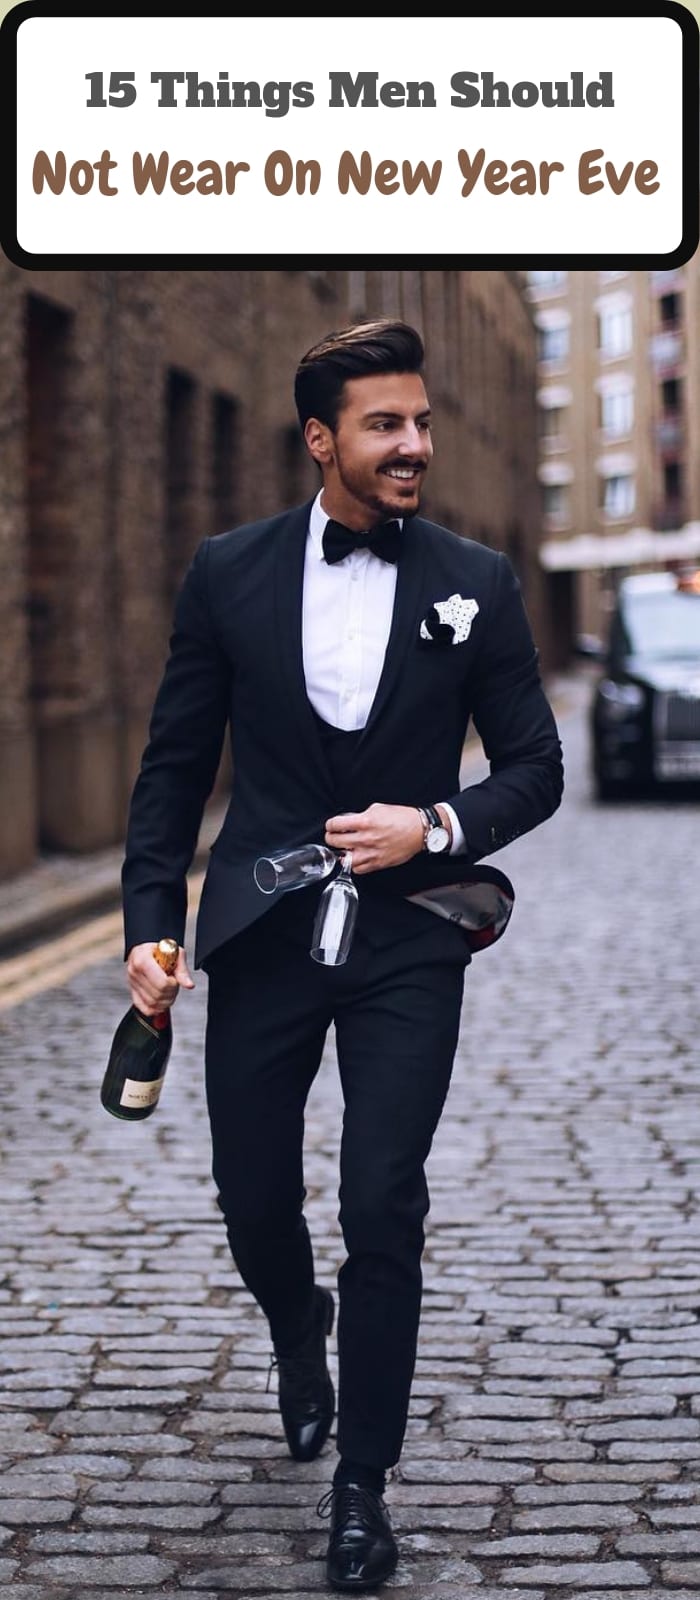 15 Things Men Should Not Wear On New Year Eve!